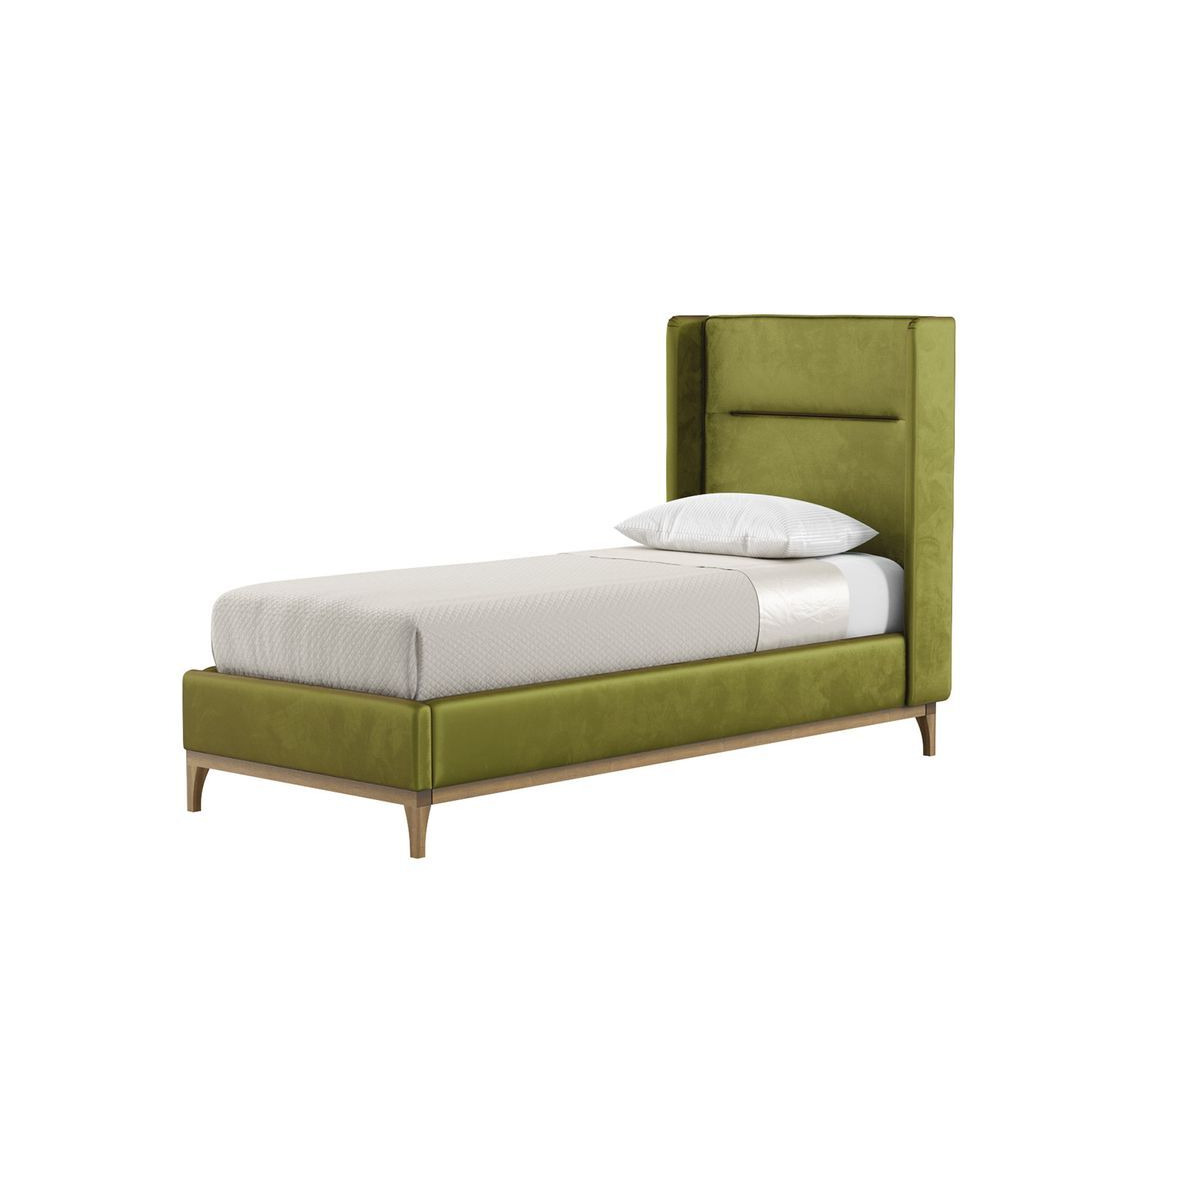 Gene 3ft Single Bed Frame with modern horizontal stitch wing headboard, olive green, Leg colour: wax black - image 1